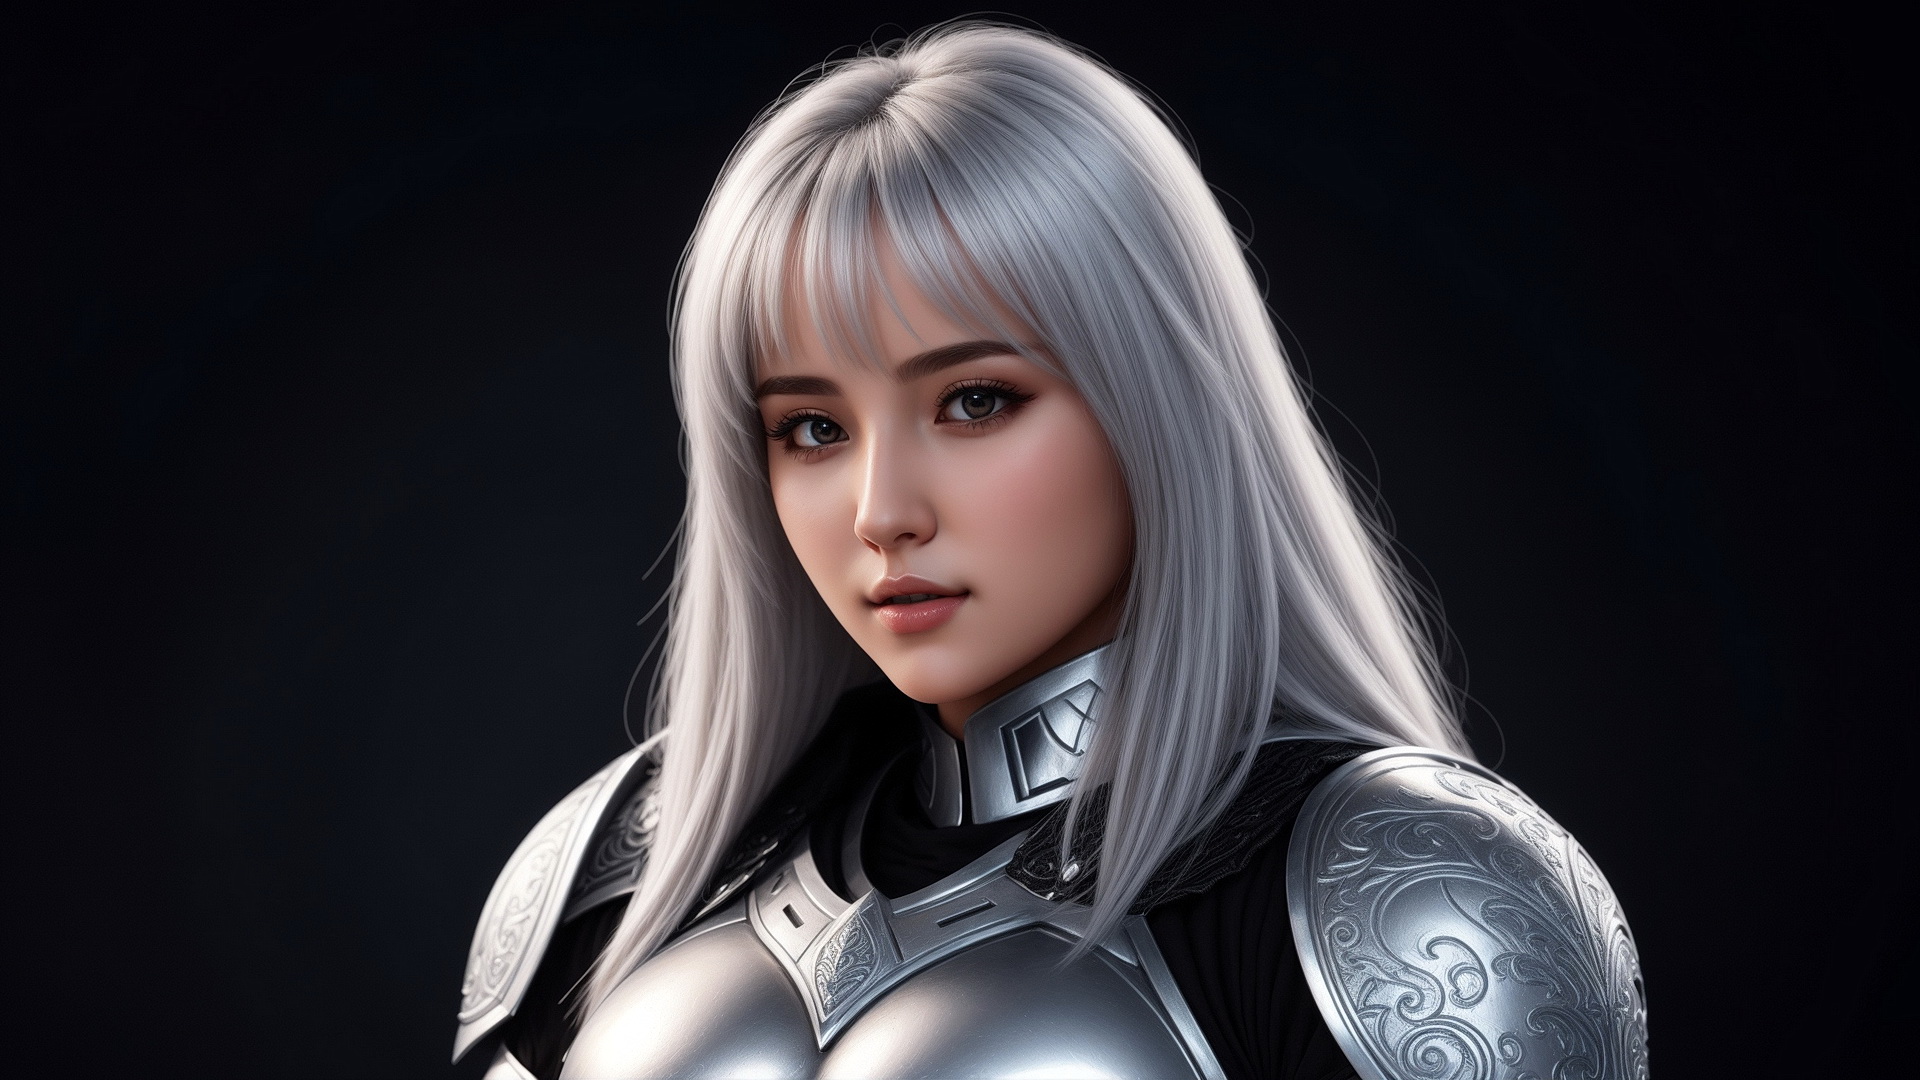 Free photo Portrait of a girl knight with white hair on a dark background